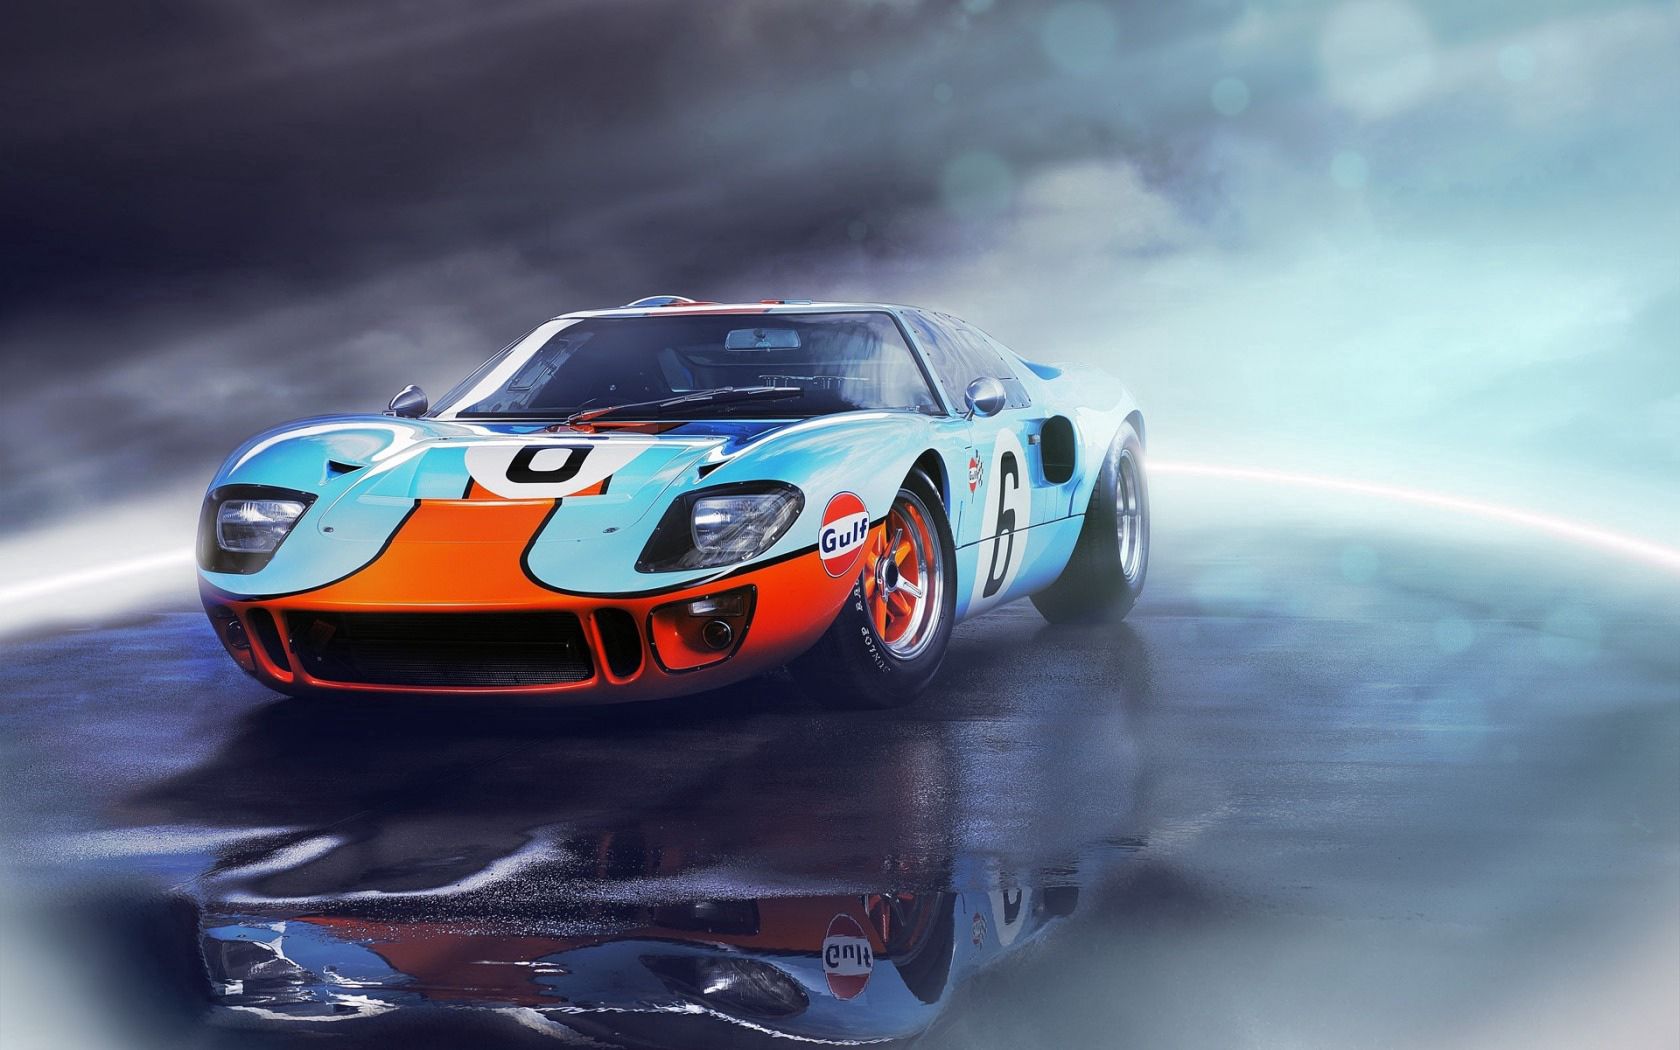 sports, ford, cars, front view, sports car, gt40 Image for desktop